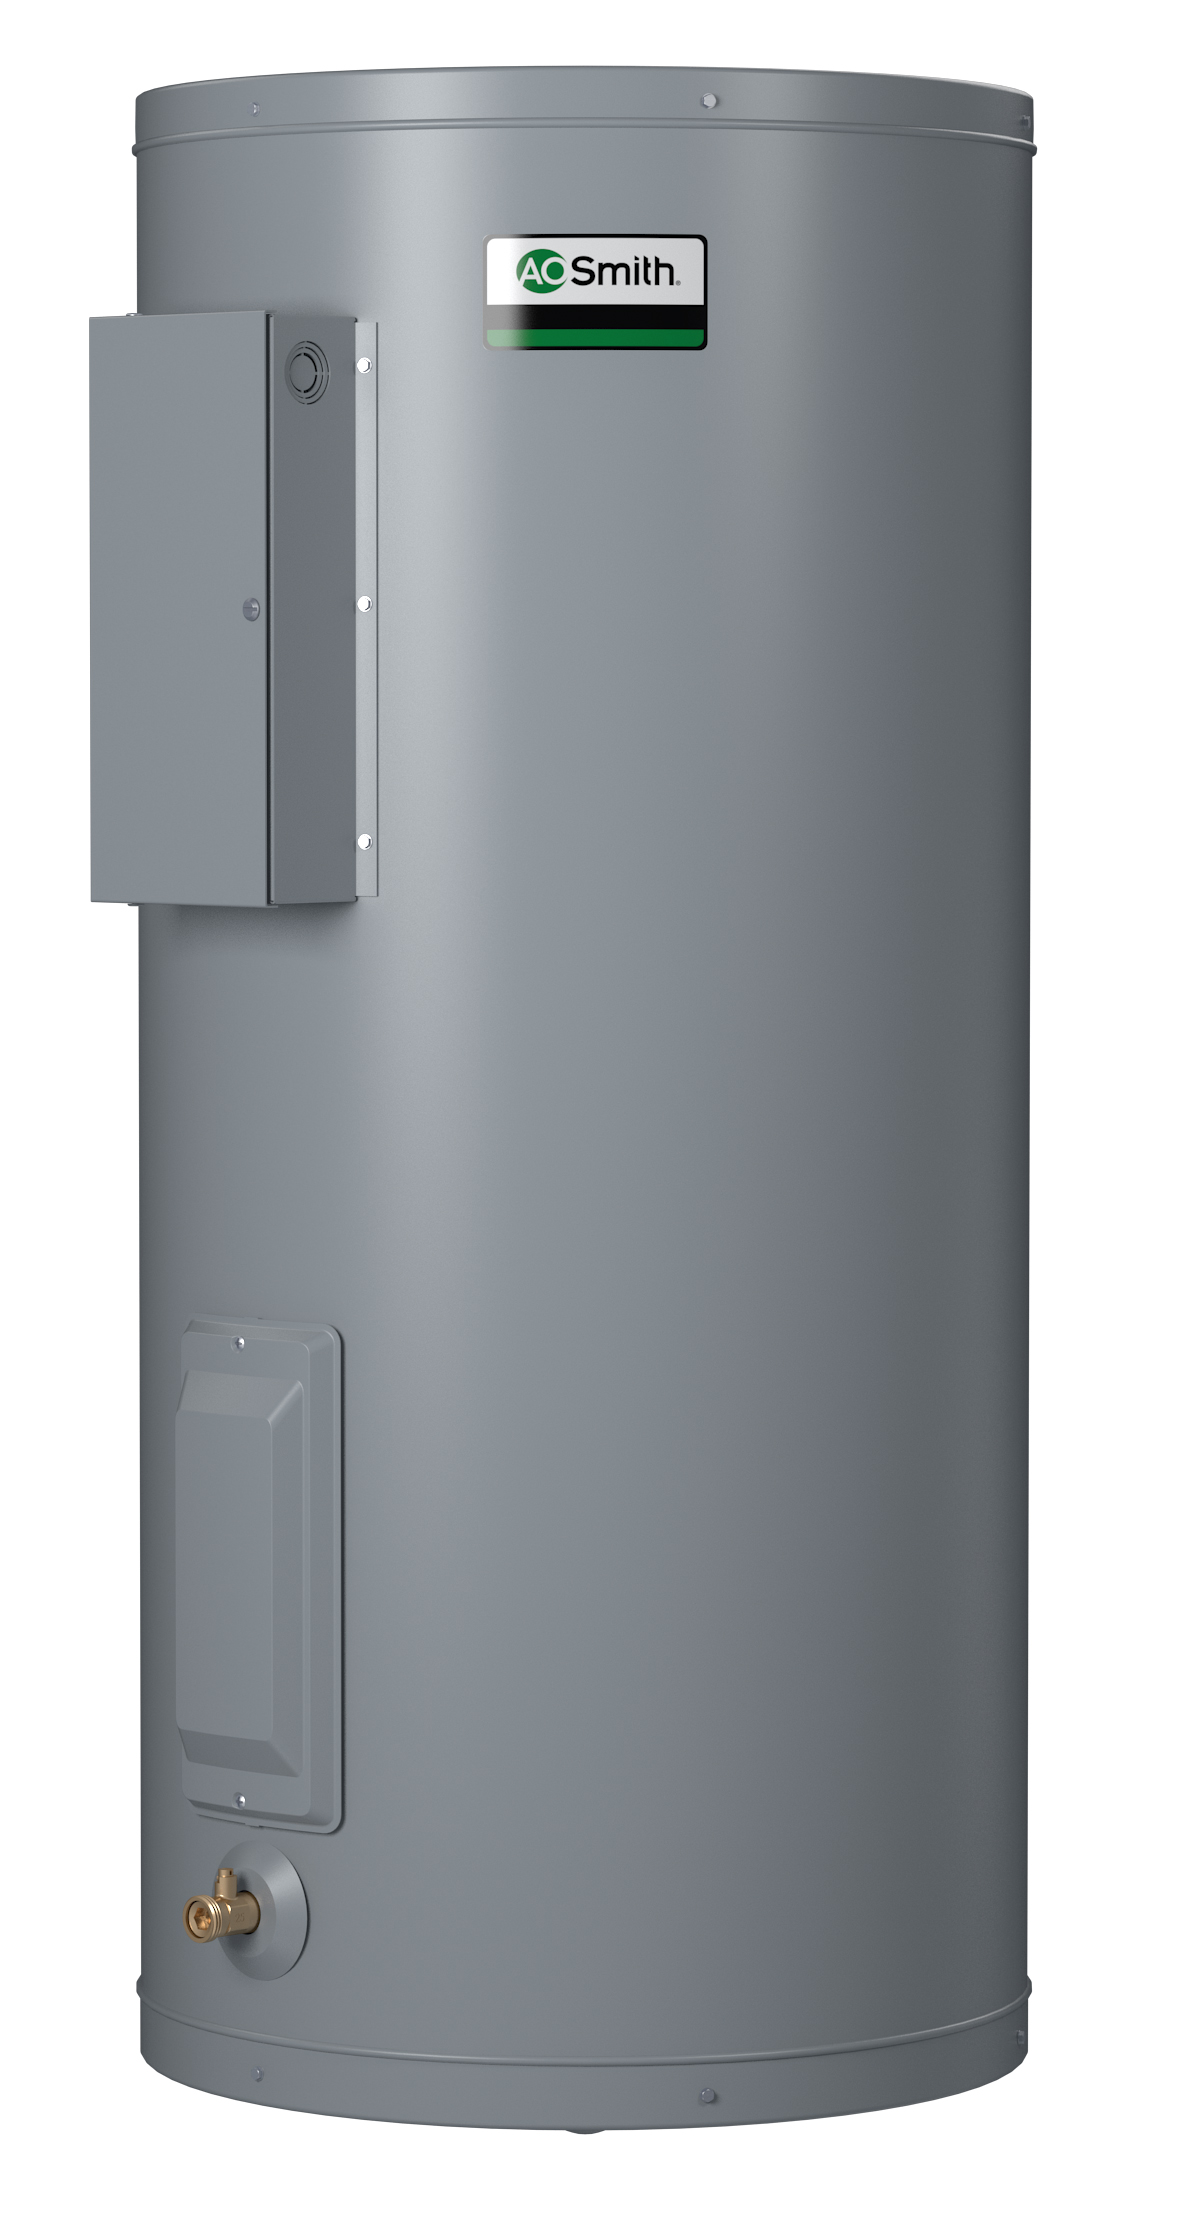 AO SMITH DEL-10S: 10 GALLONS, 1.5KW, 120 VOLT, 12.5 AMPS, 1 PHASE, SINGLE ELEMENT, LIGHT DUTY COMMERCIAL ELECTRIC WATER HEATER, DURA-POWER